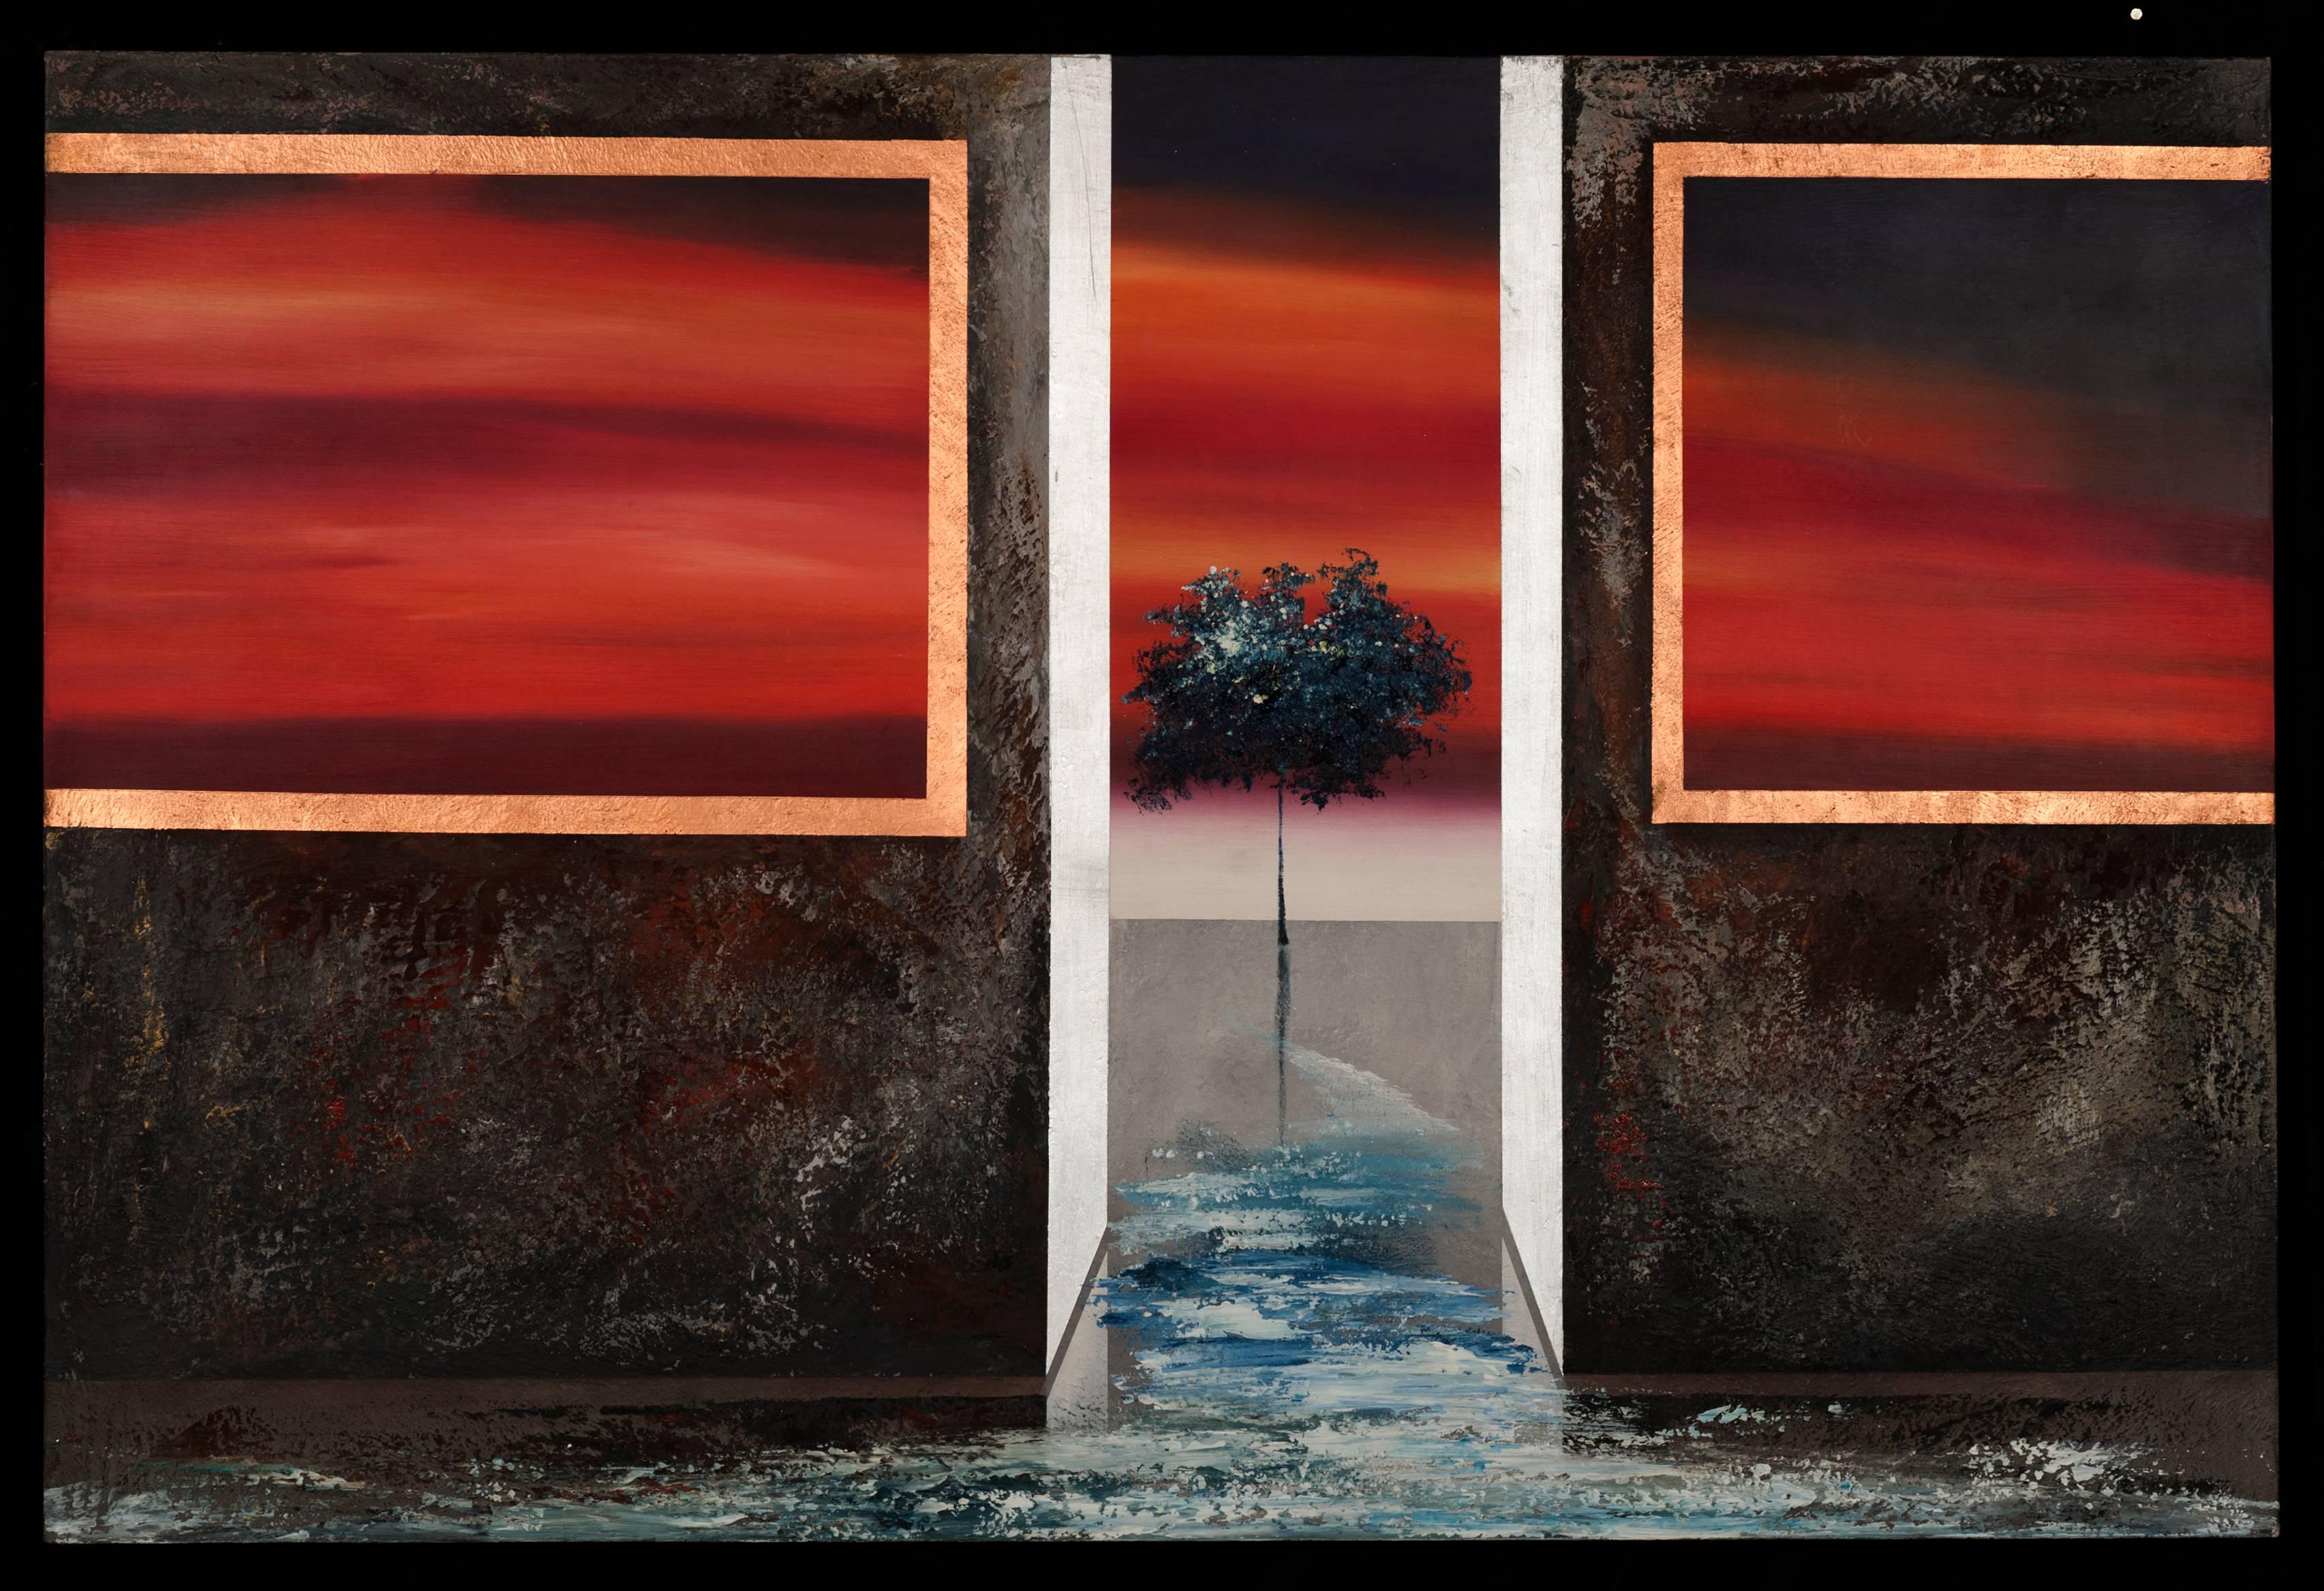 Terra do Fogo surreal painting oil on canvas- sunset red - Painting by Fernando Vignoli